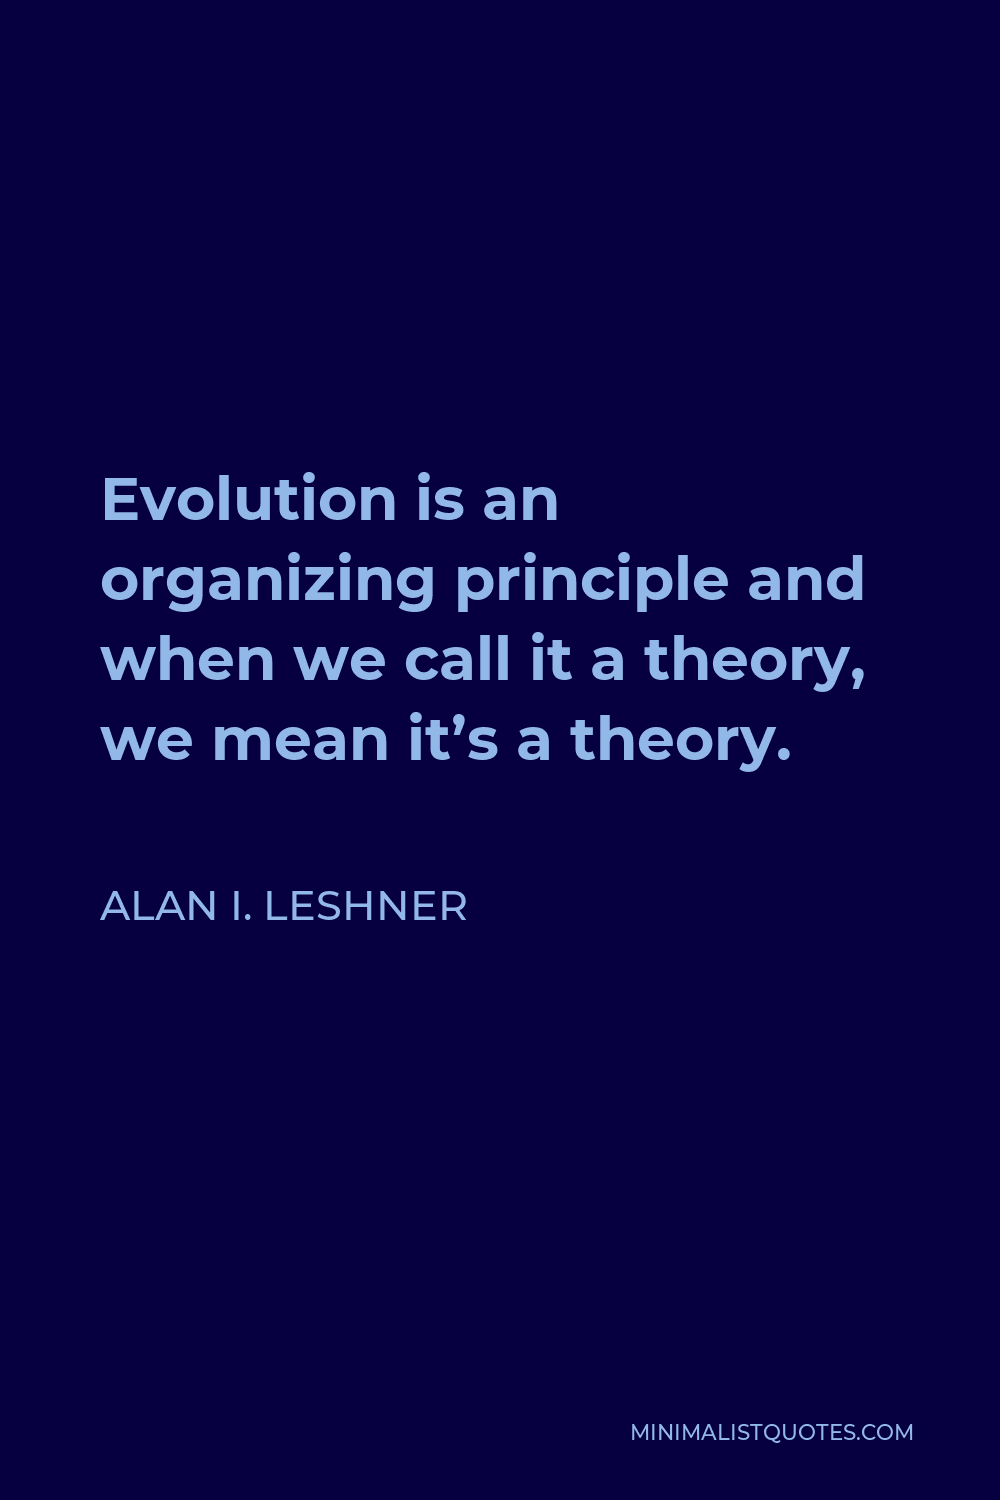 Alan I. Leshner Quote - Evolution is an organizing principle and when we call it a theory, we mean it’s a theory.